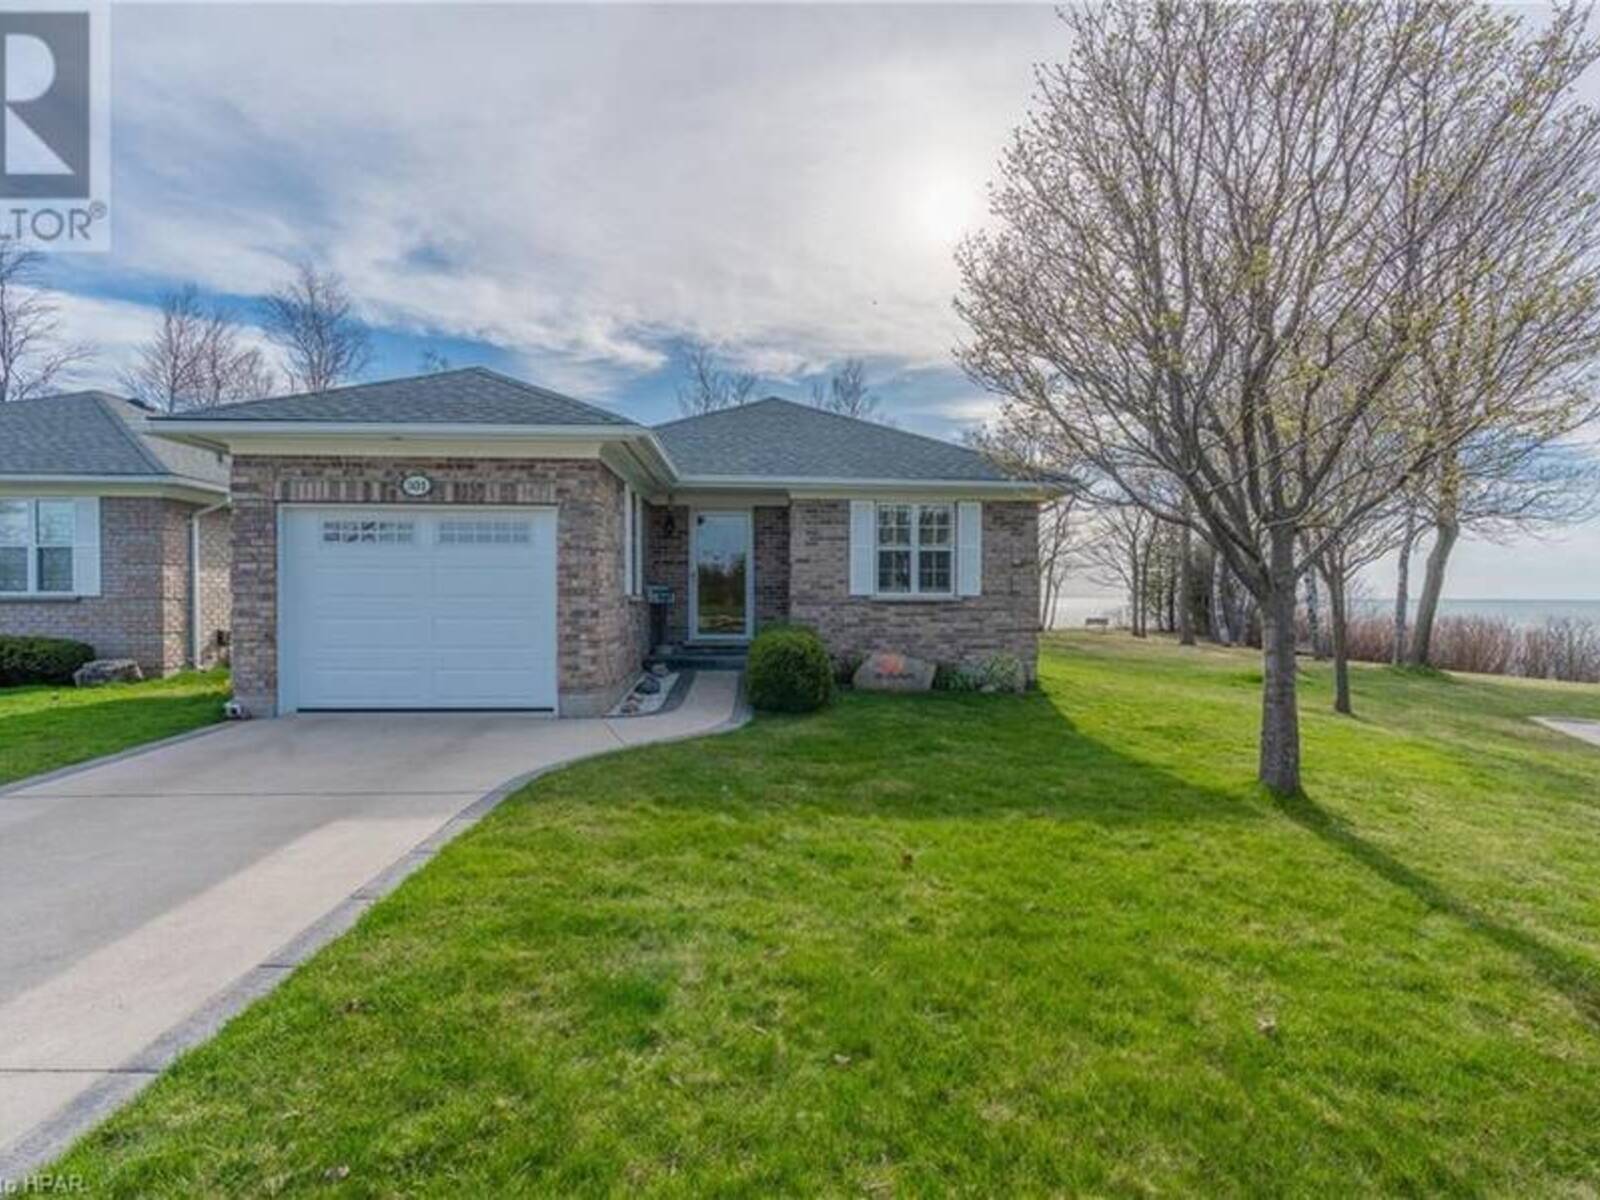 301 BETHUNE Crescent, Goderich, Ontario N7A 4M6